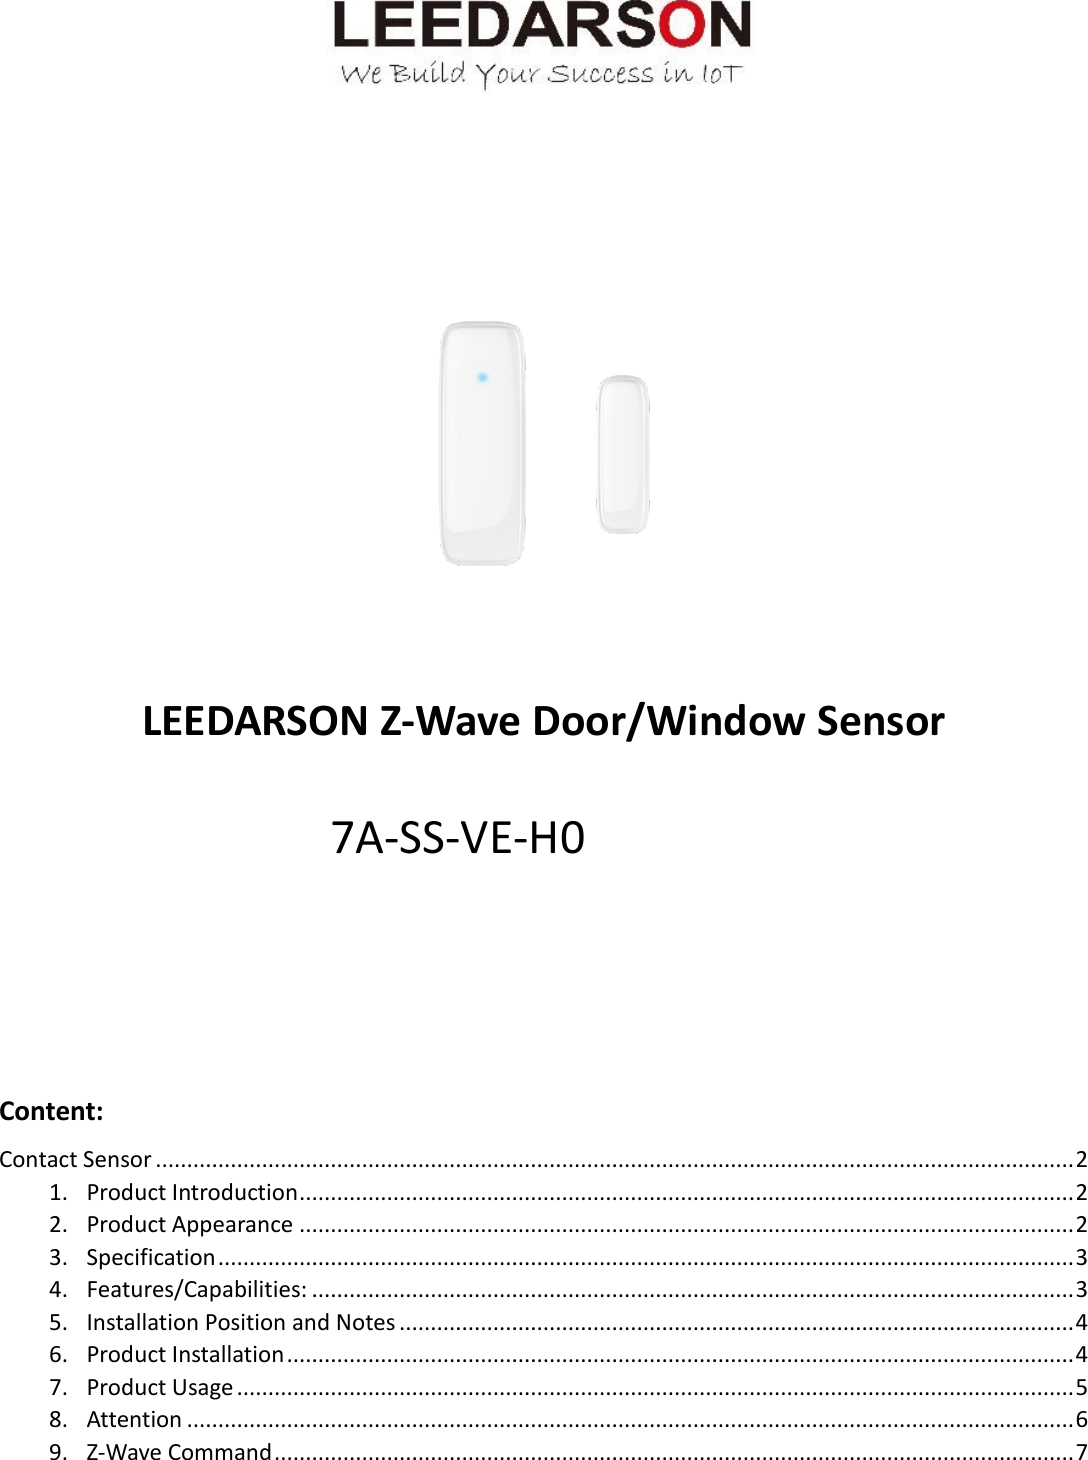          LEEDARSON Z-Wave Door/Window Sensor      Content: Contact Sensor ................................................................................................................................................... 2 1. Product Introduction ............................................................................................................................ 2 2. Product Appearance ............................................................................................................................ 2 3. Specification ......................................................................................................................................... 3 4. Features/Capabilities: .......................................................................................................................... 3 5. Installation Position and Notes ............................................................................................................ 4 6. Product Installation .............................................................................................................................. 4 7. Product Usage ...................................................................................................................................... 5 8. Attention .............................................................................................................................................. 6 9. Z-Wave Command ................................................................................................................................ 7 7A-SS-VE-H0